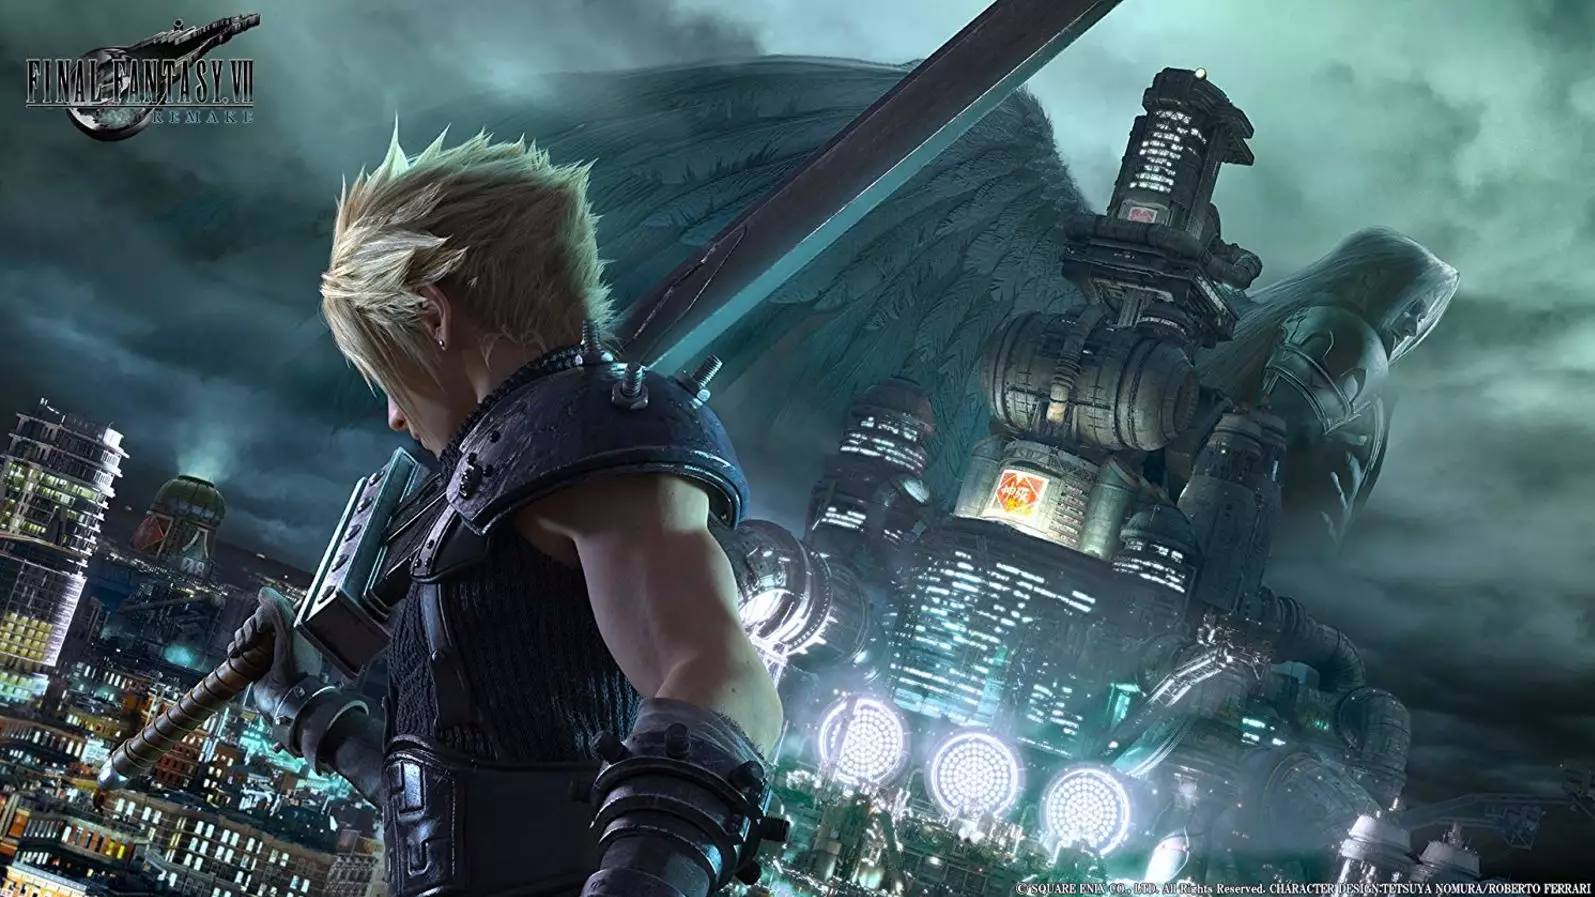 ‘Final Fantasy 7 Remake’ Gets An Early 2020 Release Date